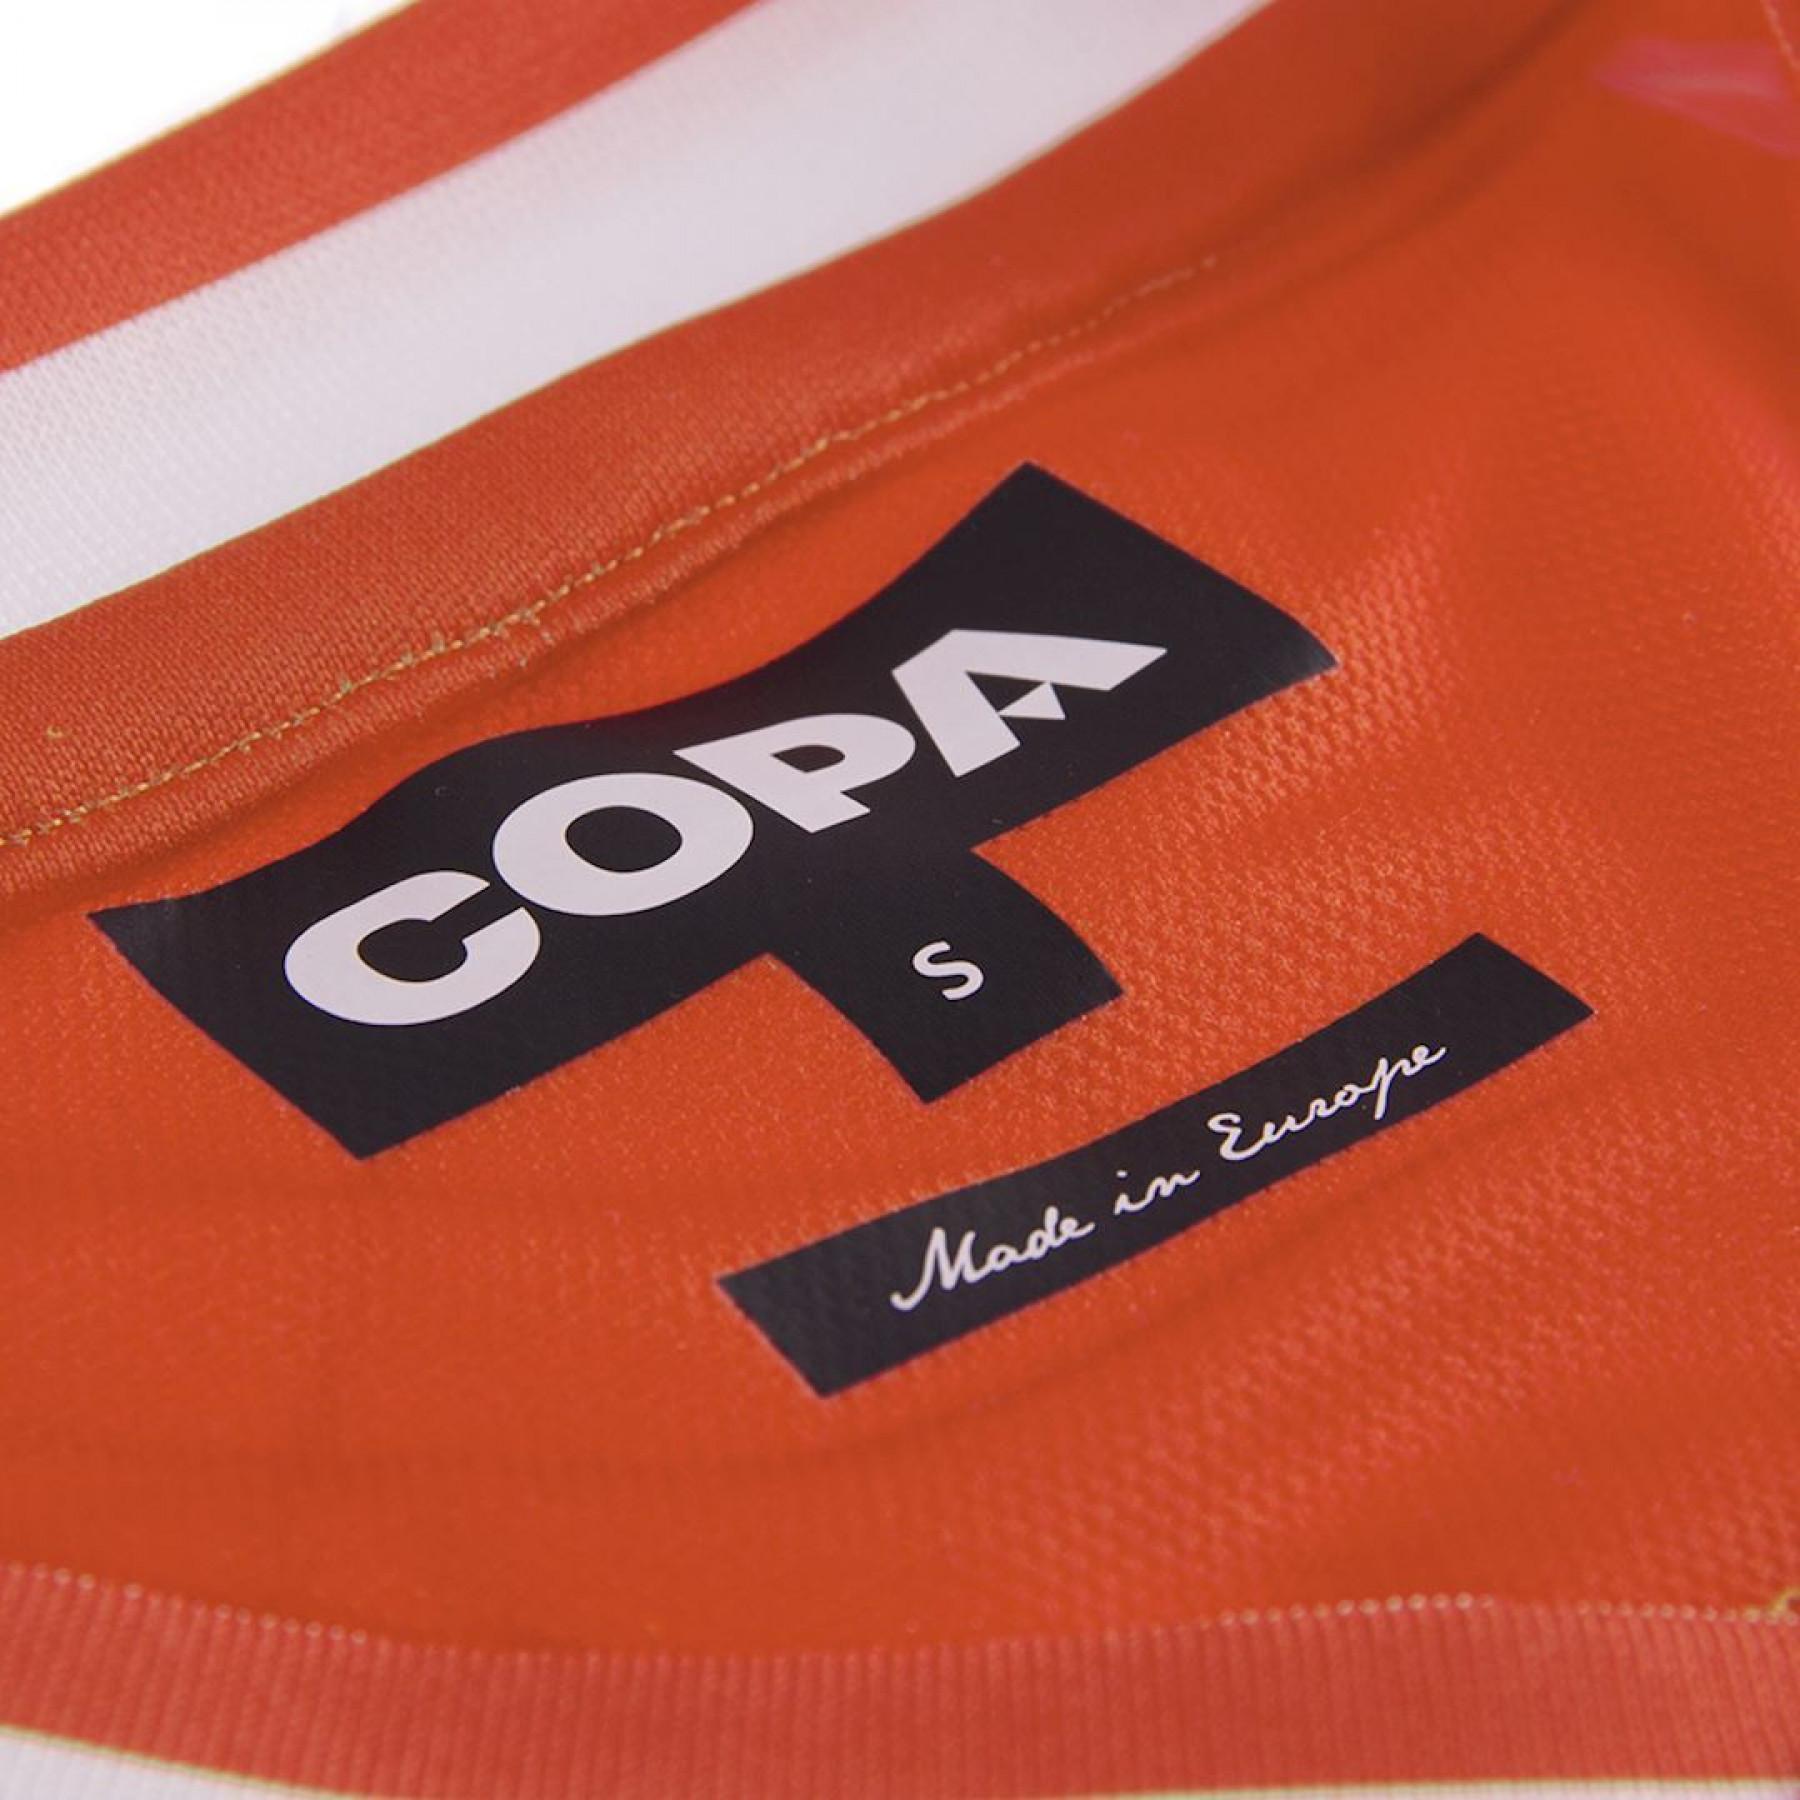 Maillot Copa Pays-Bas